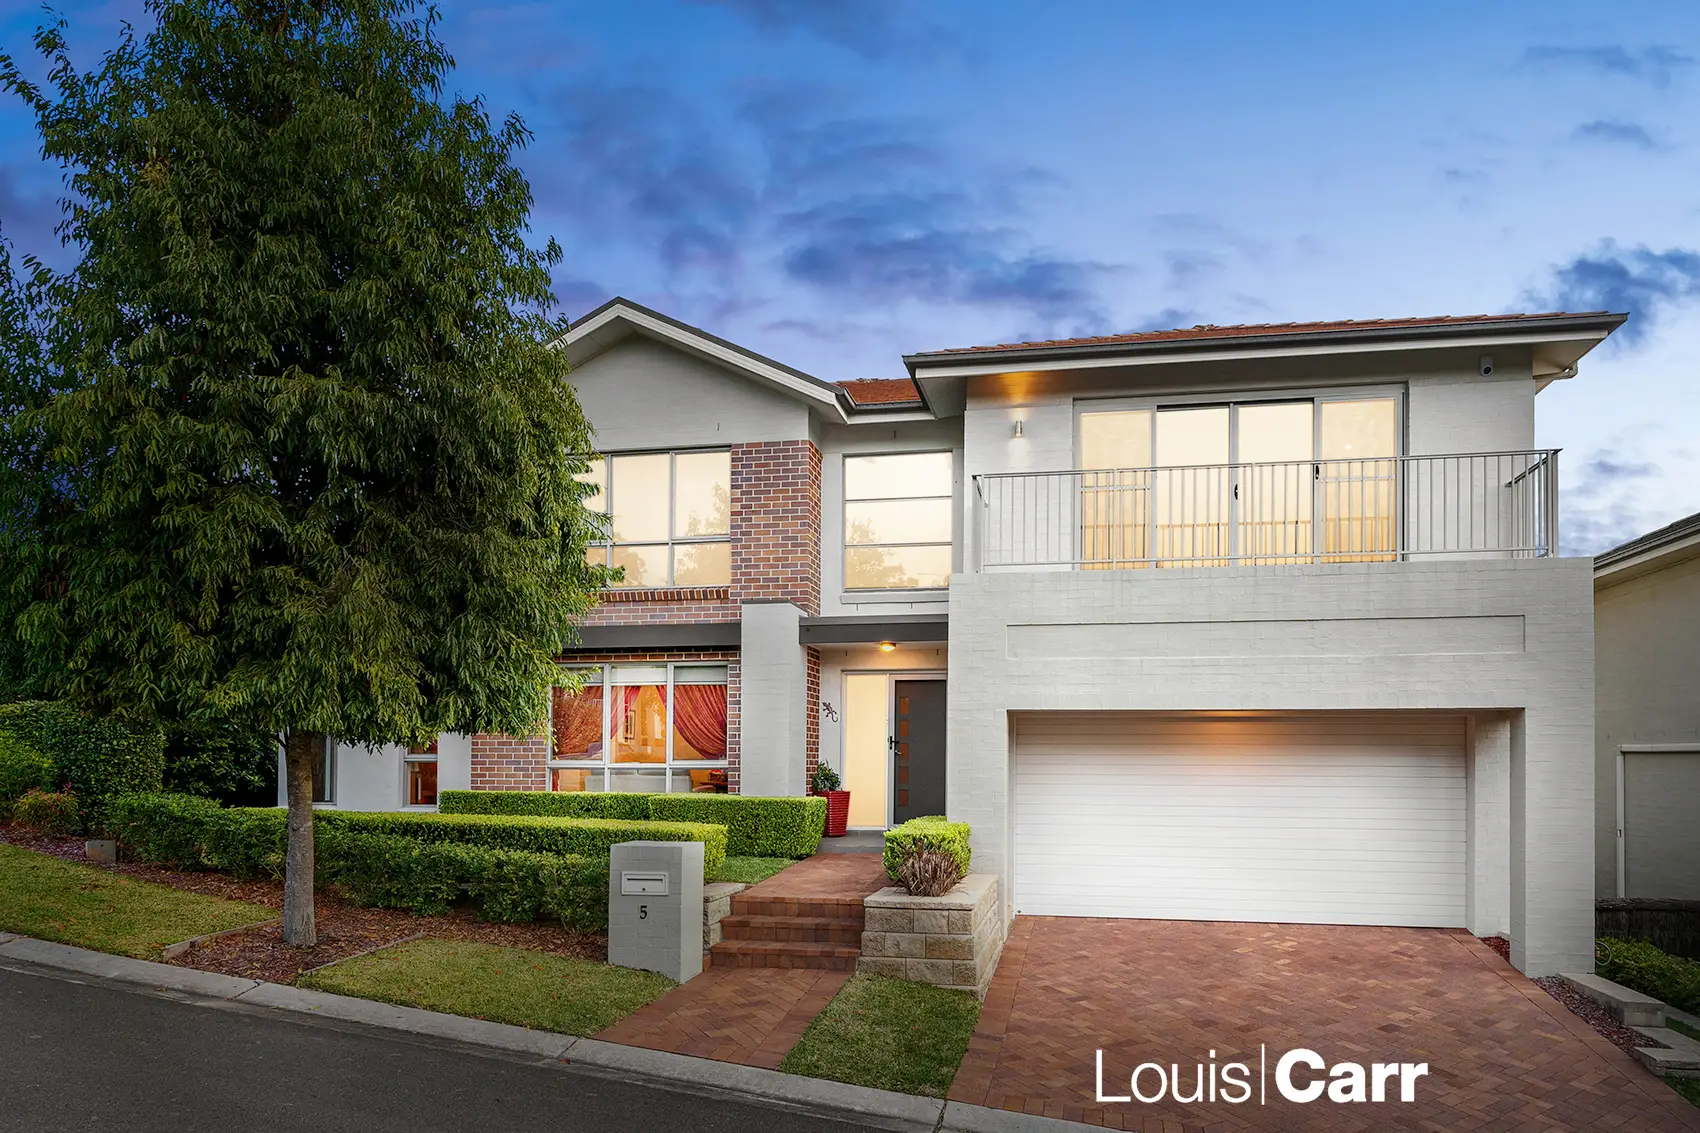 Photo #1: 5 Chelsea Road, Castle Hill - Sold by Louis Carr Real Estate